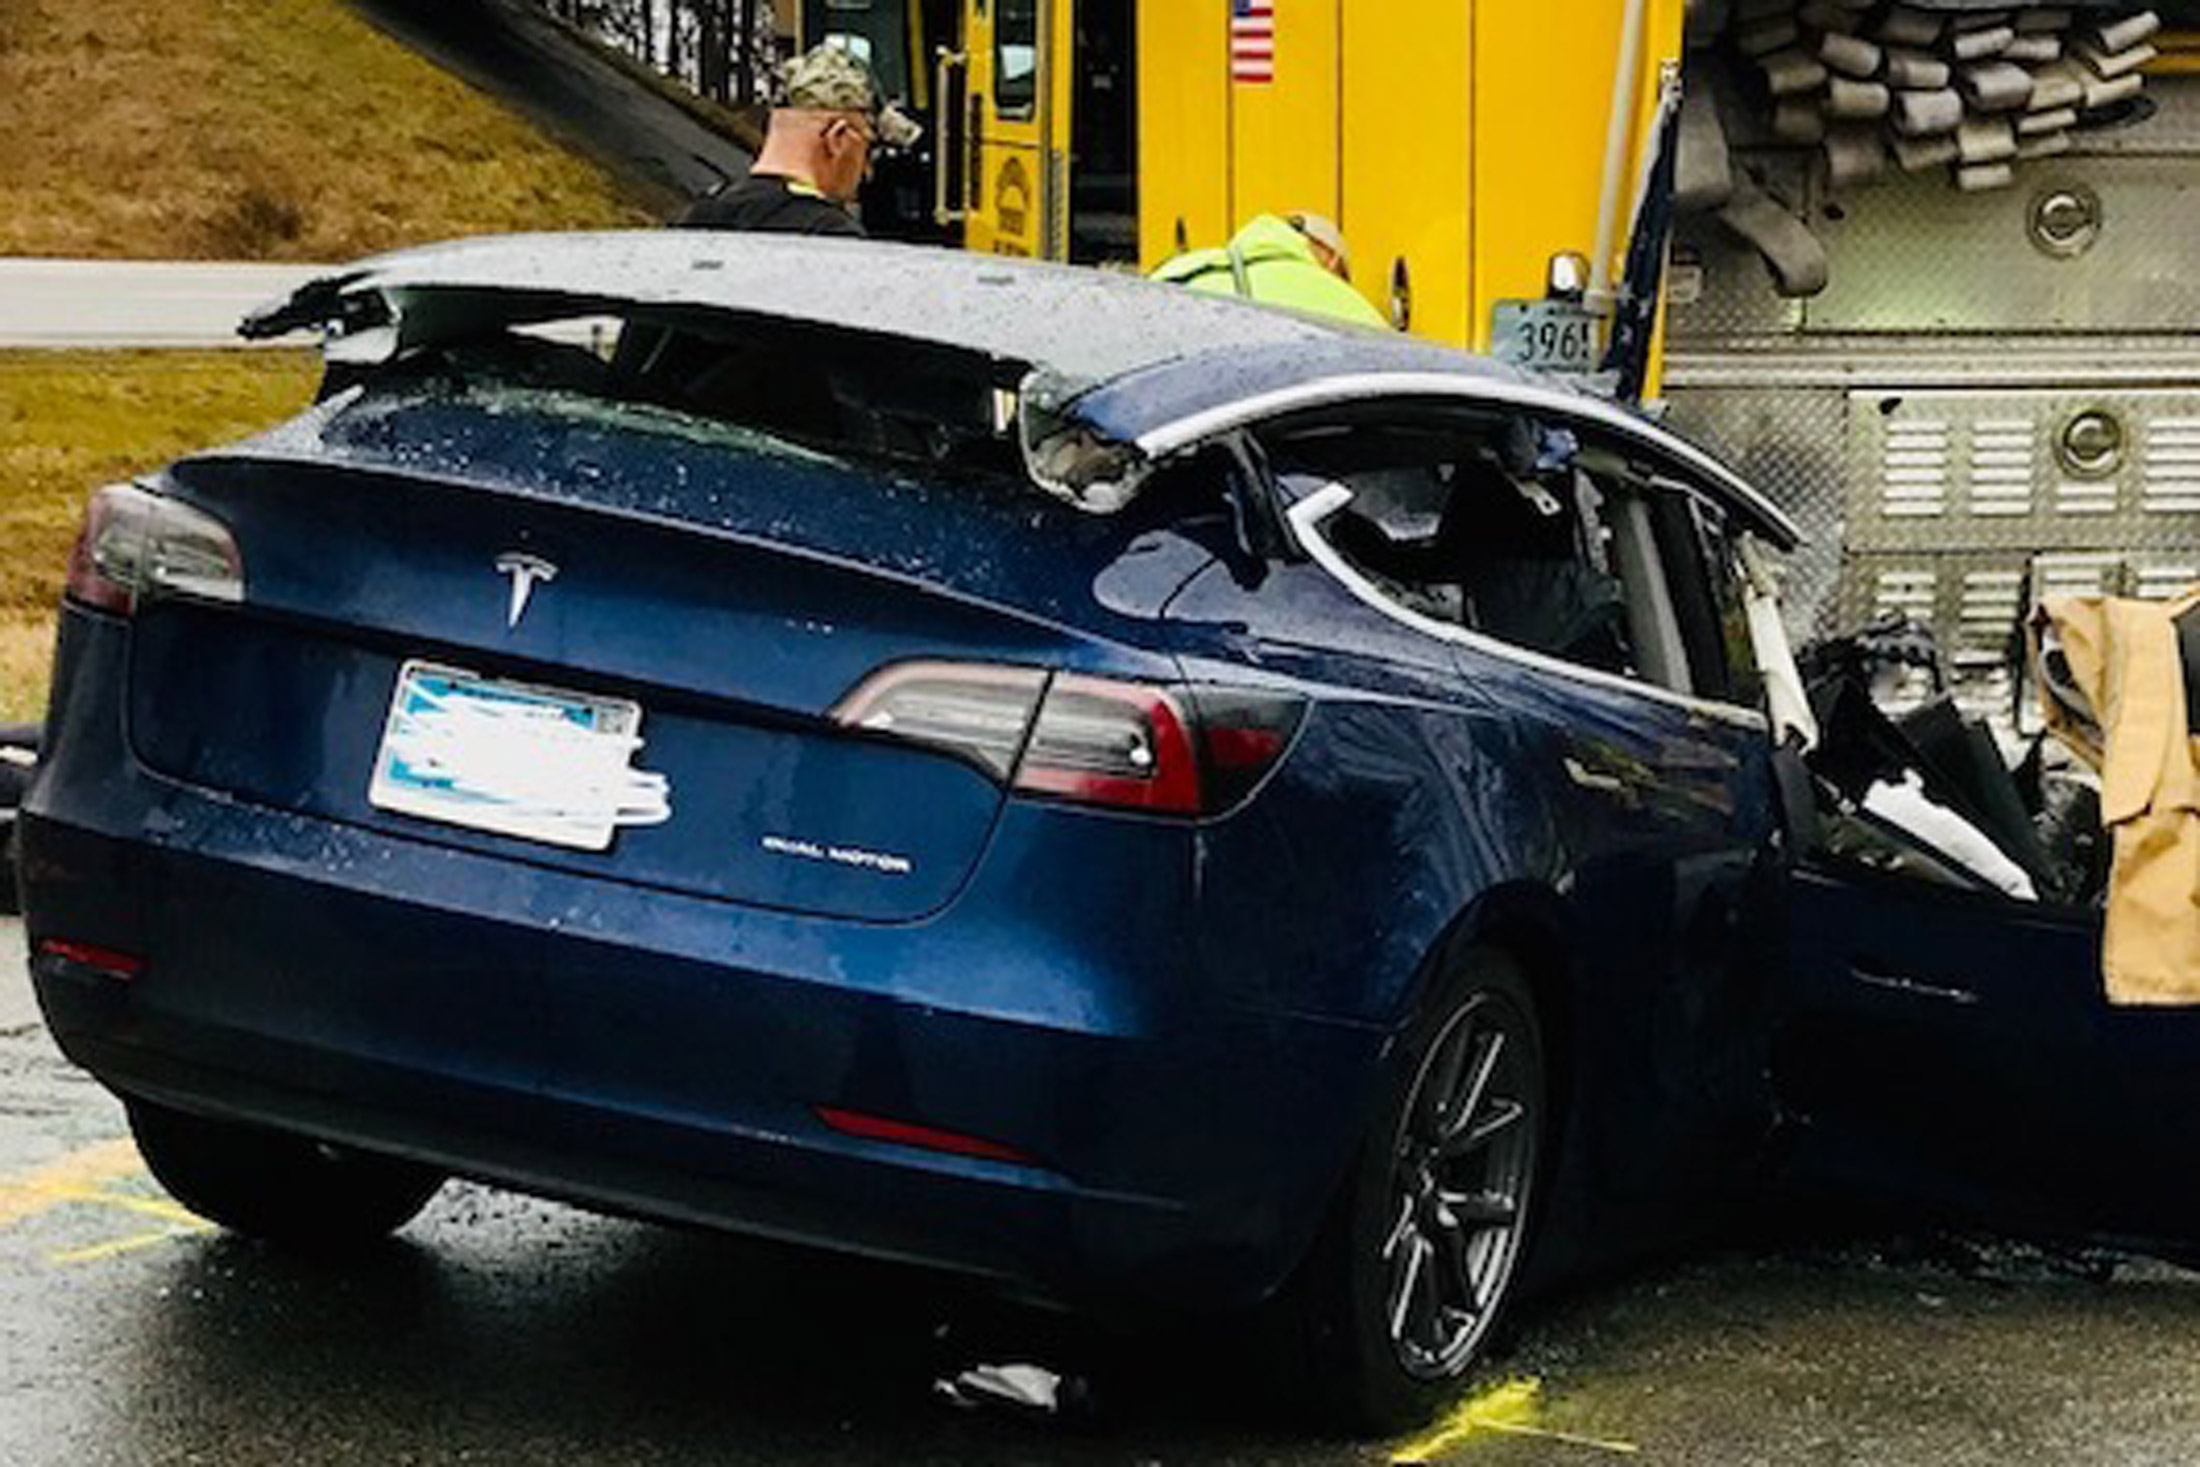 A Tesla crashed into a stopped firetruck on I-70 in Putnam County, Indiana, in December 2019.